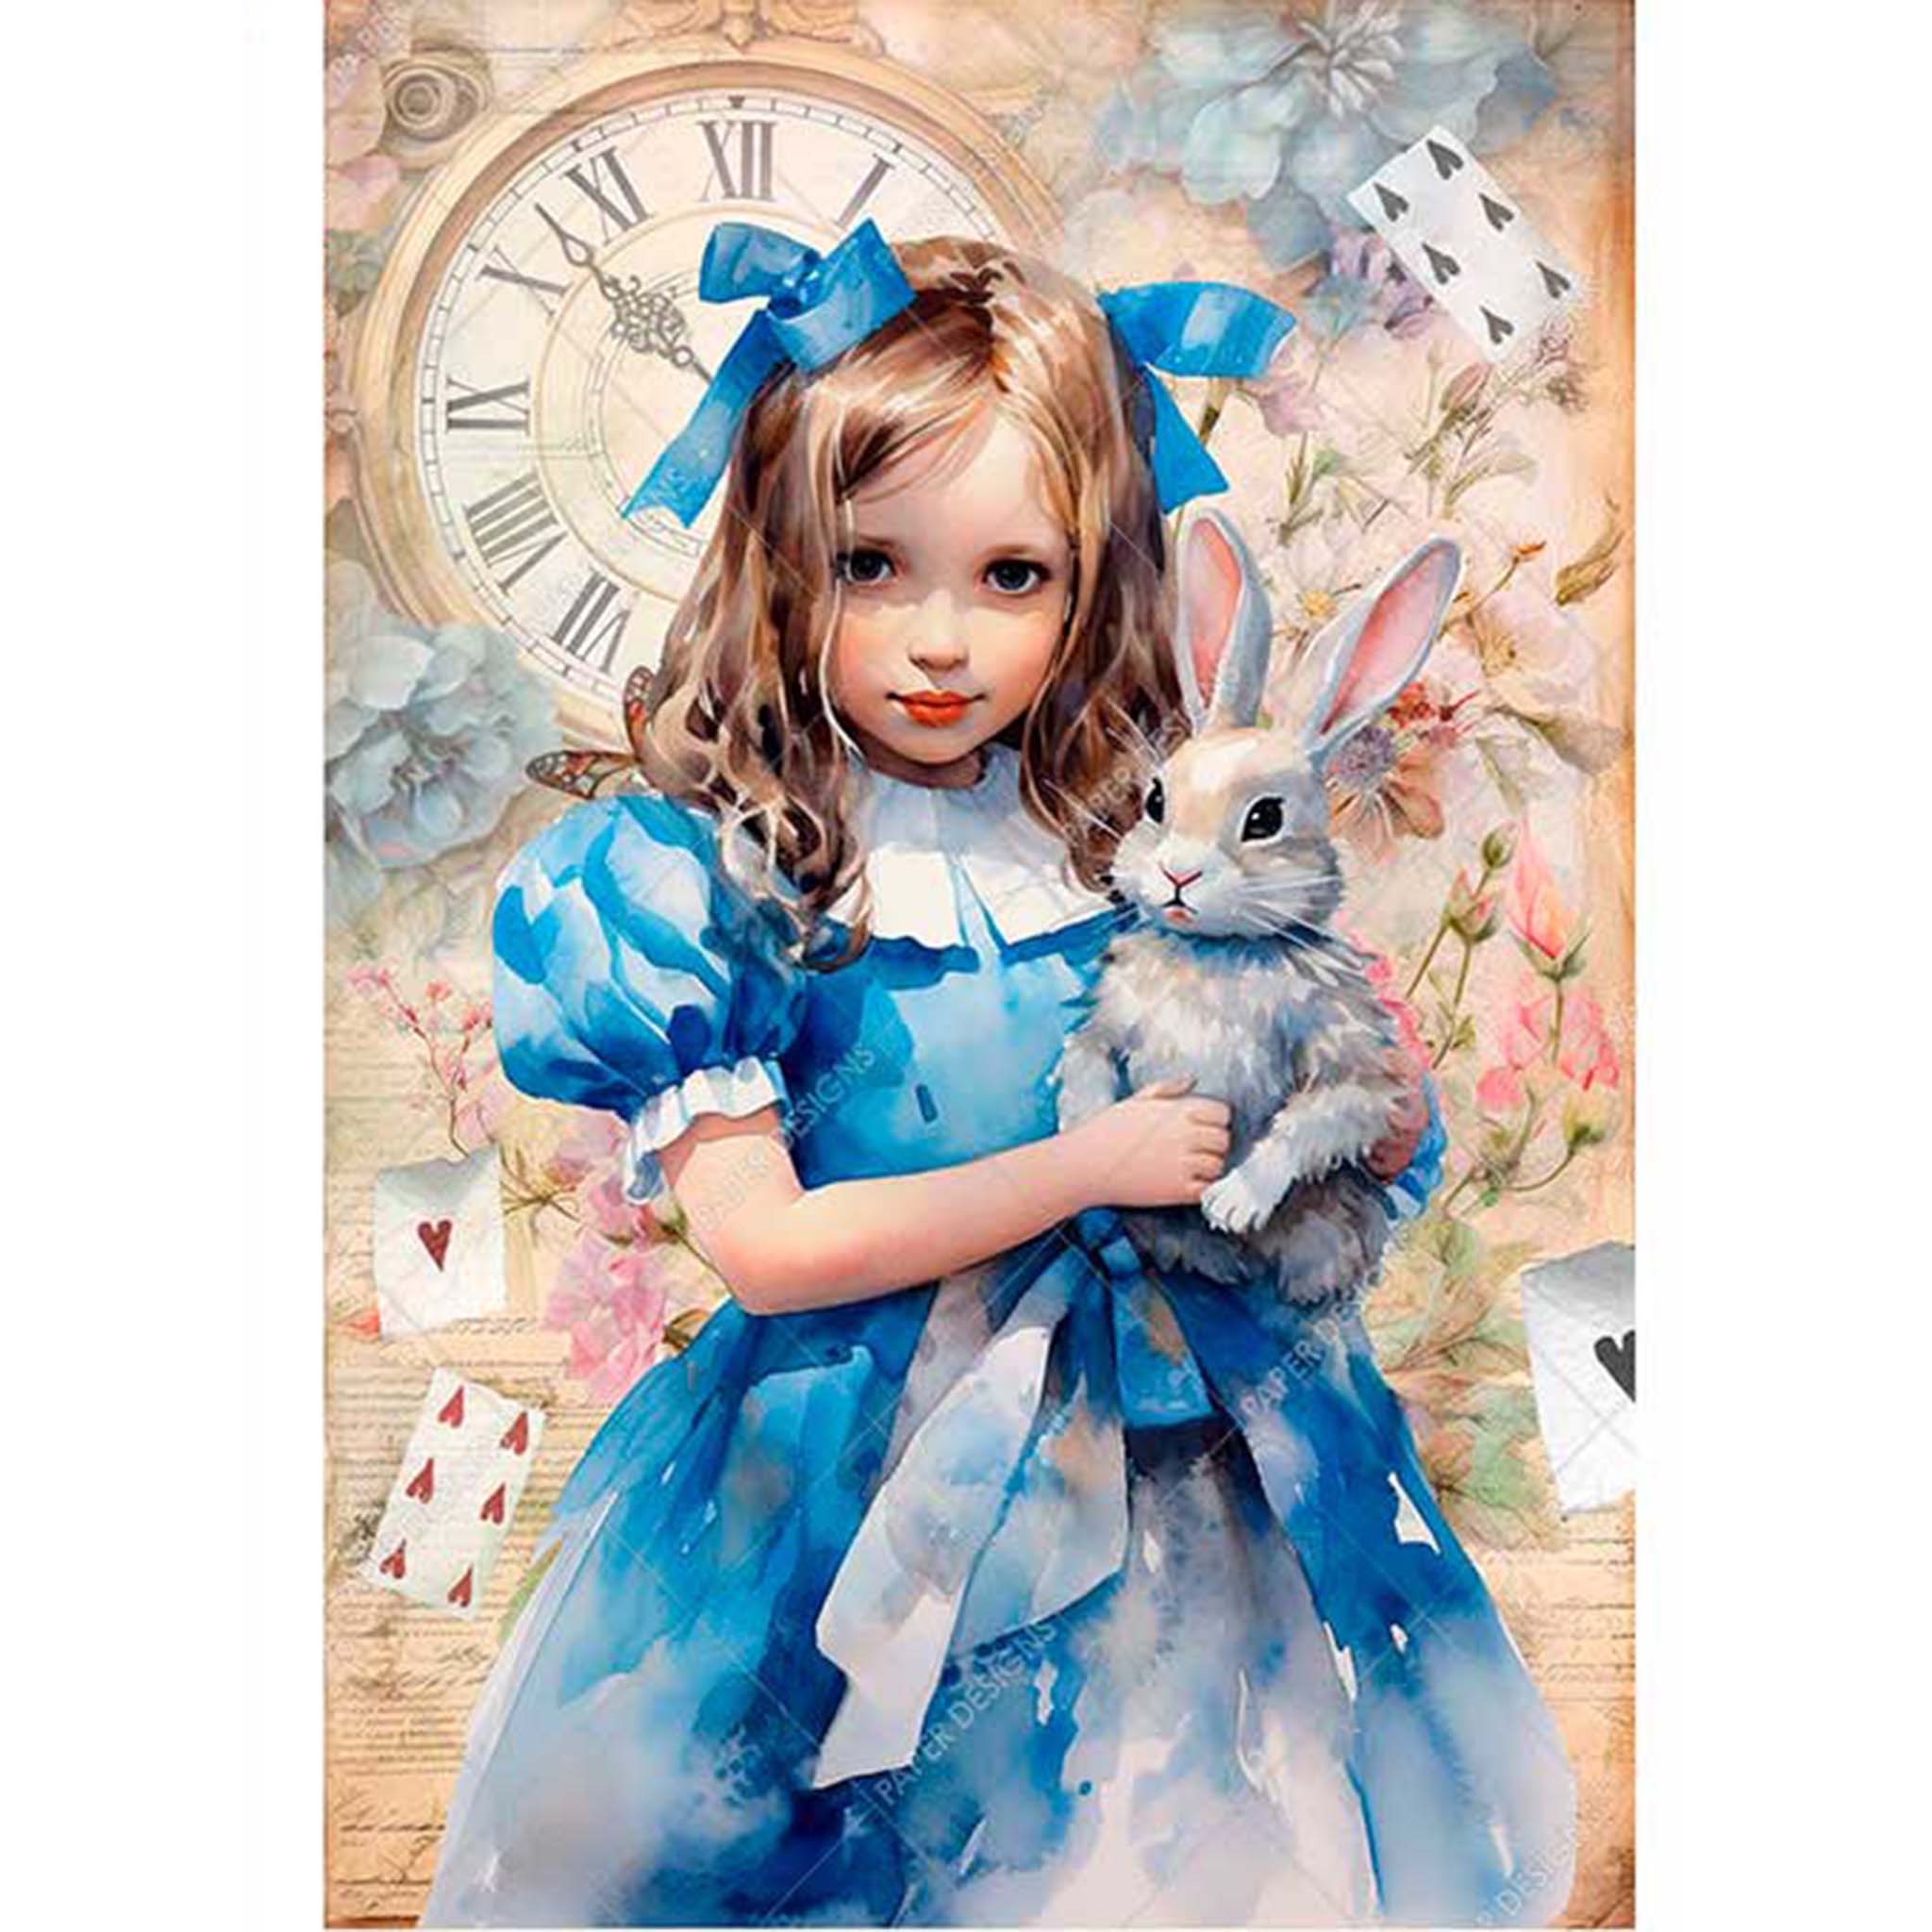 A4 rice paper design featuring a young Alice holding a white rabbit in front of a background filled with Alice In Wonderland themed items. White borders are n the sides.